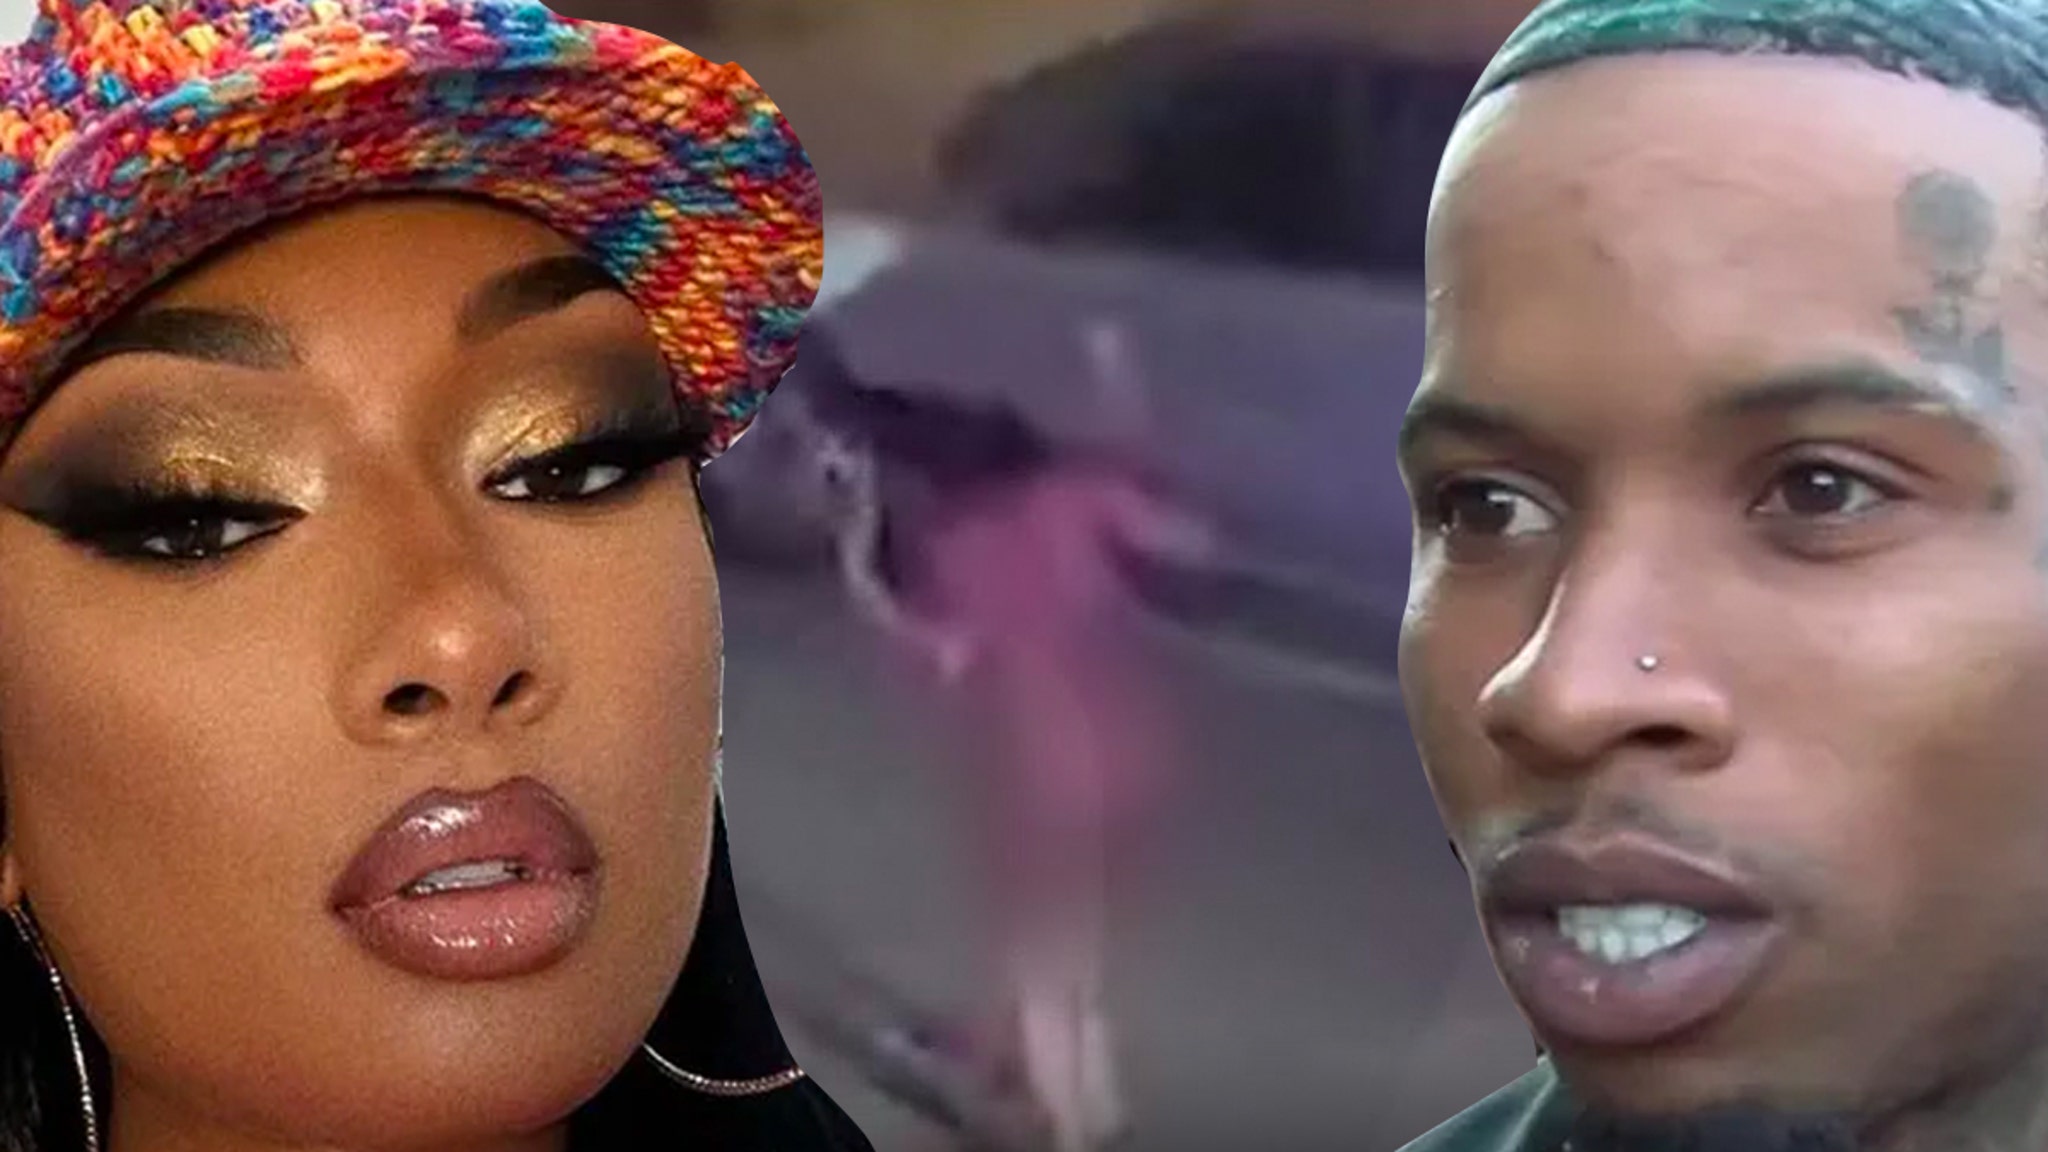 Megan Thee Stallion Says She Can’t Be In Same Room As Tory Lanez, No Peace Since Shooting